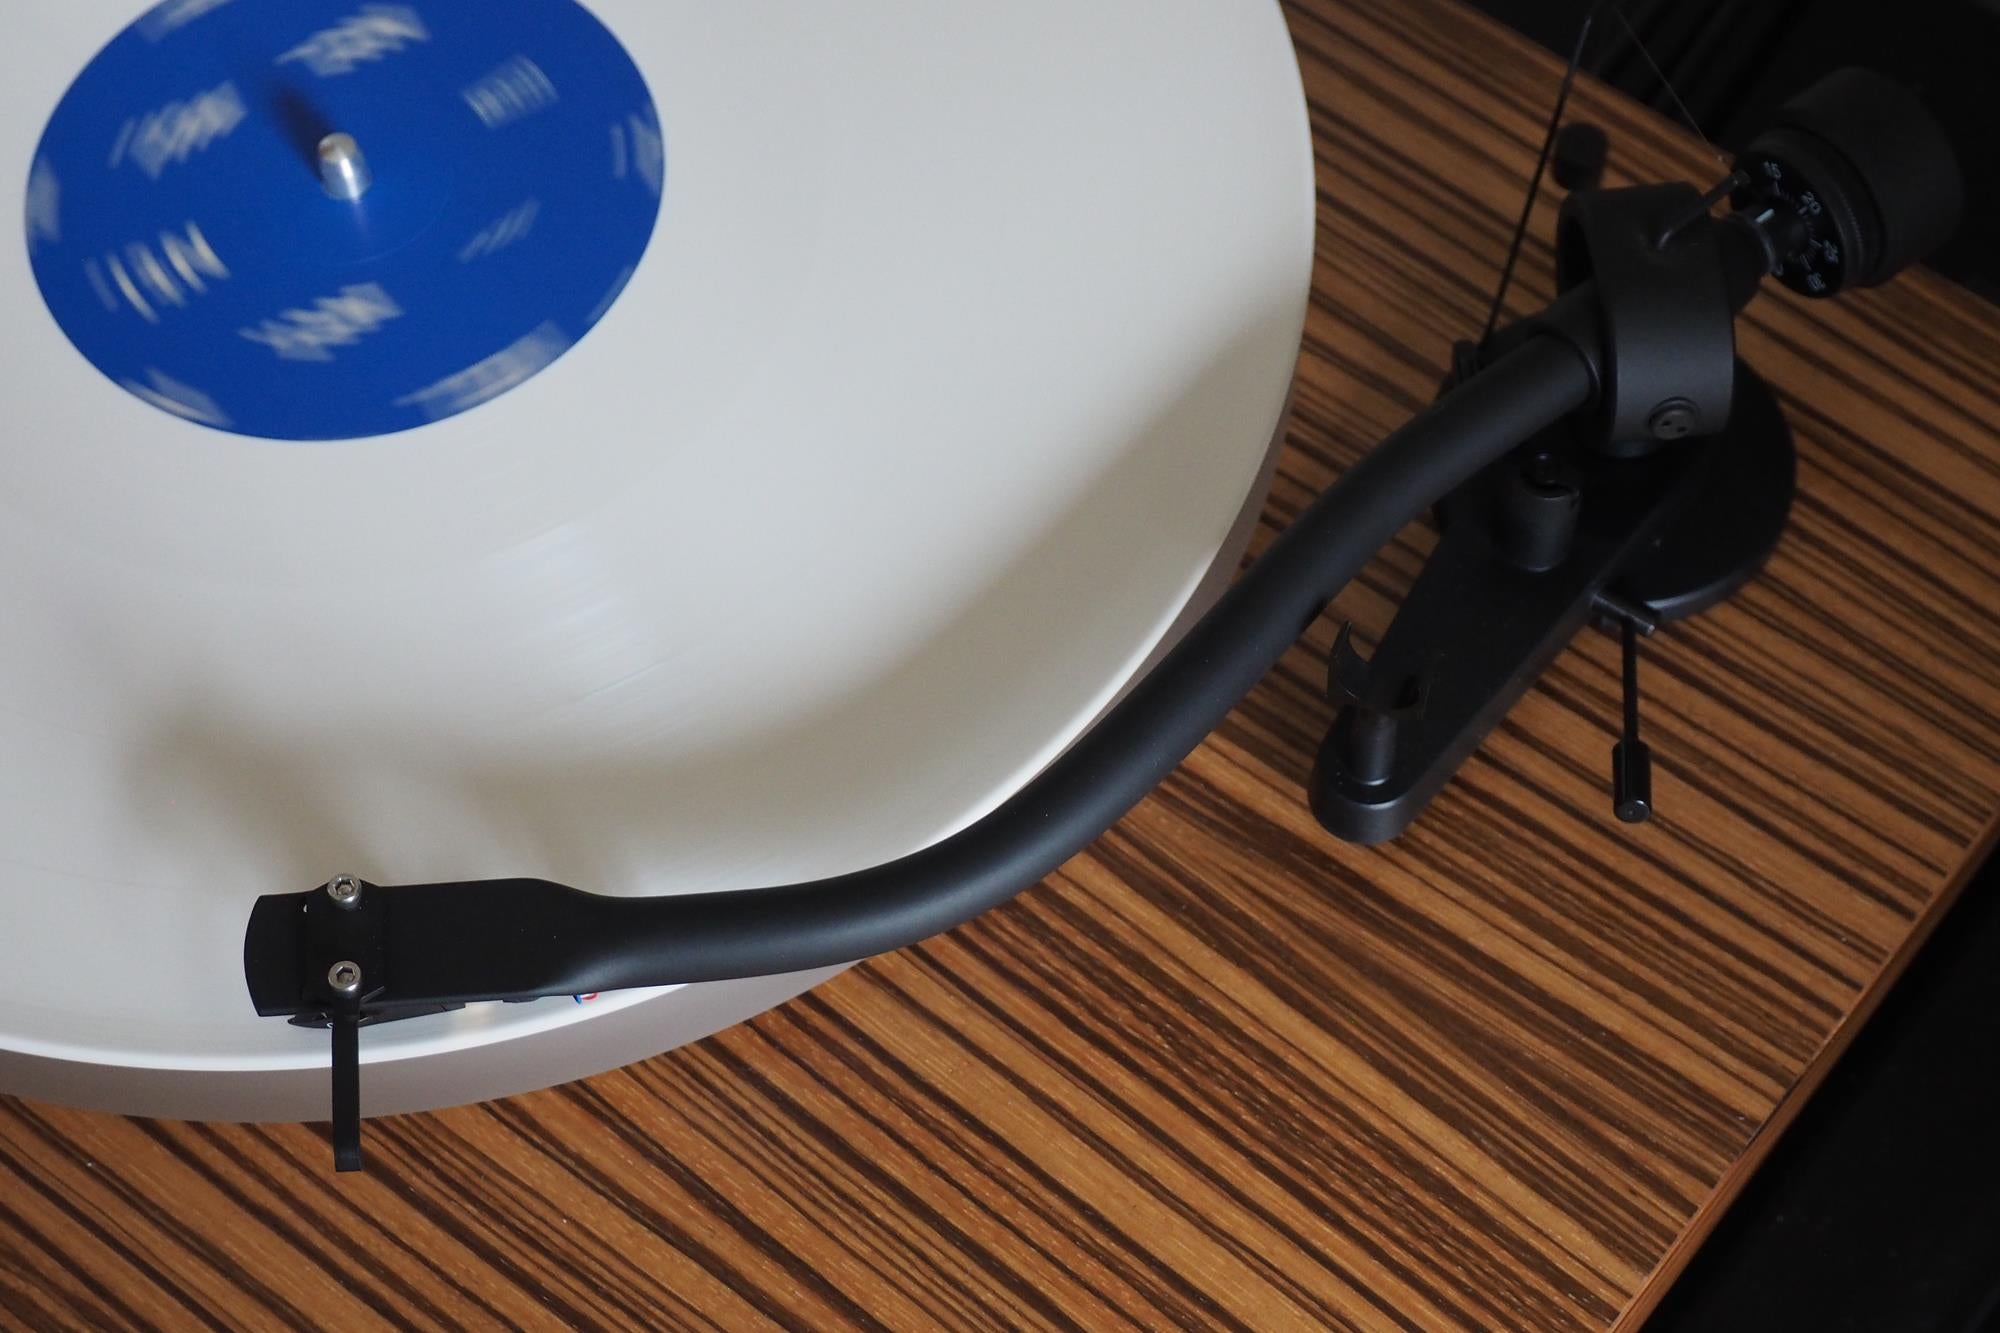 Crosley C20 turntable with white and blue vinyl record playing.